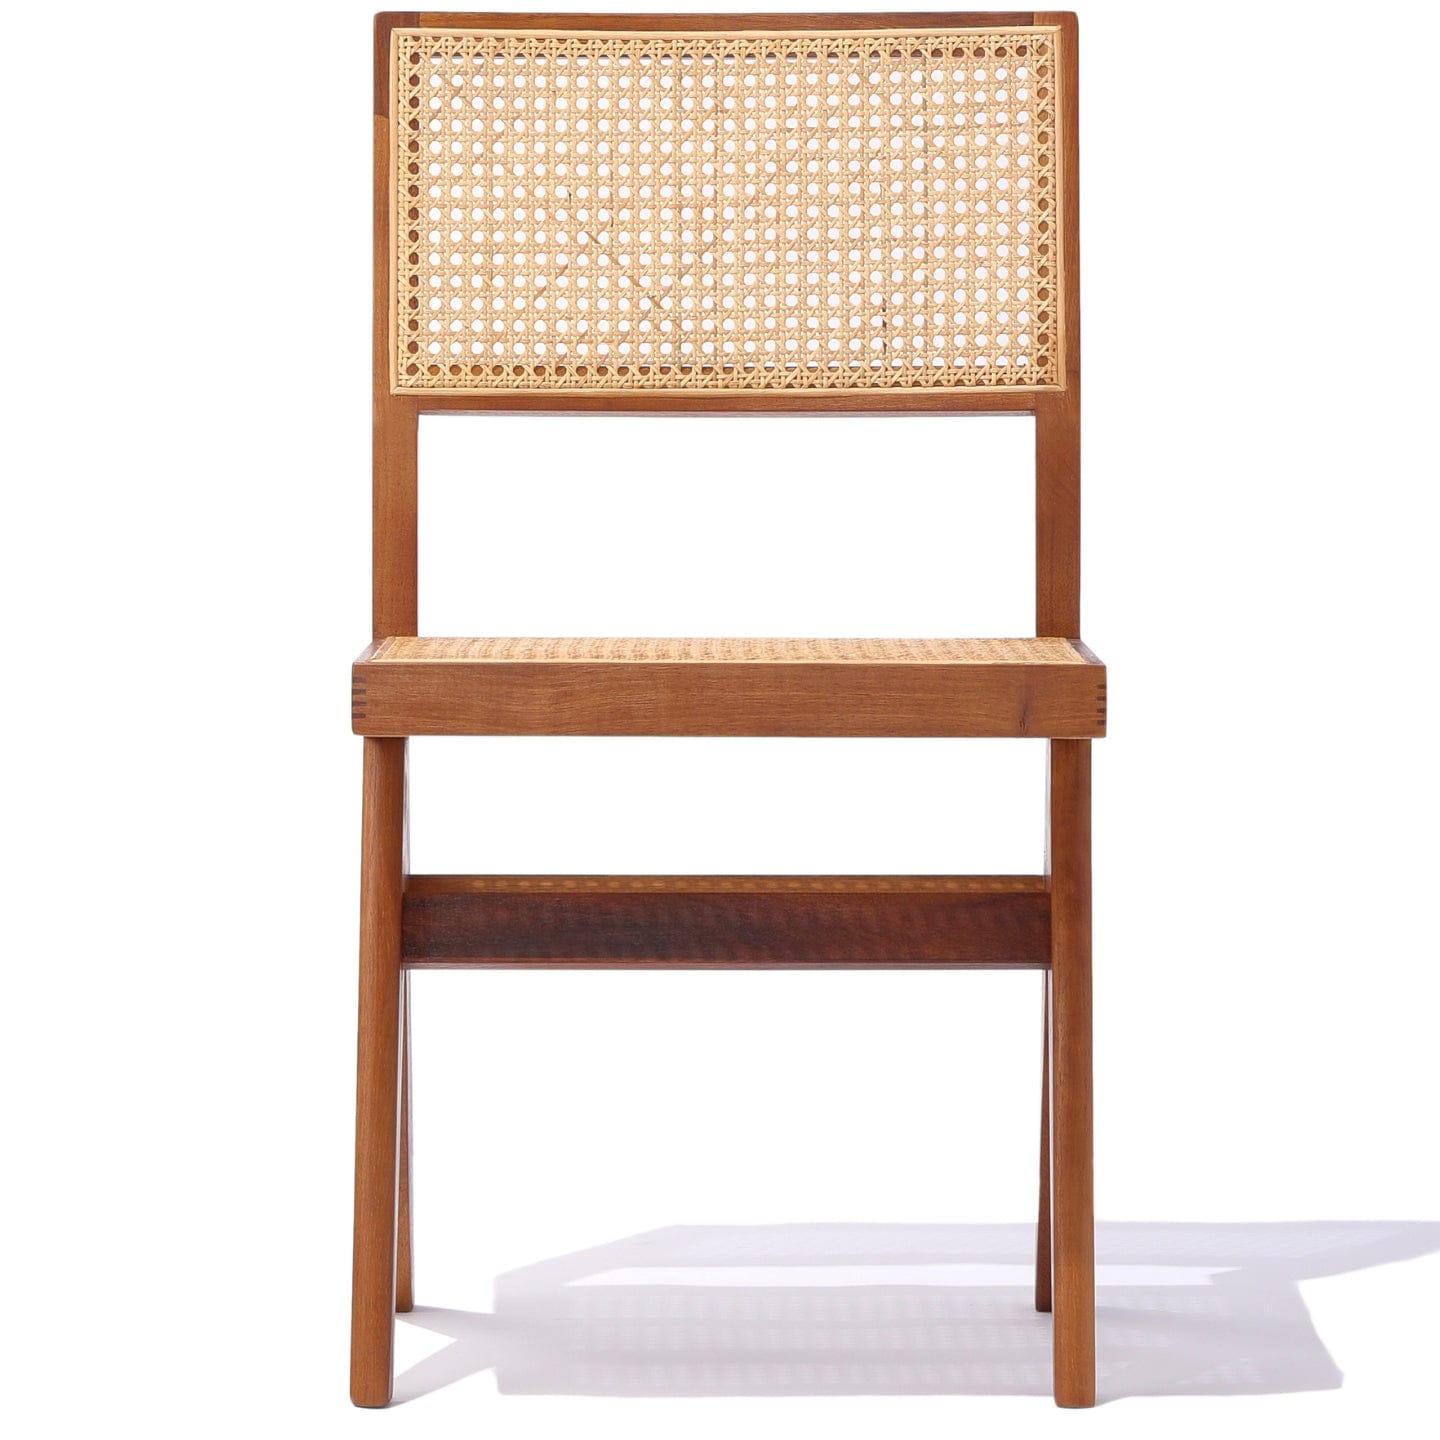 sohoConcept Outdoor Chairs Pierre J Outdoor Dining Chair  | Teak Wood Full Wicker Rattan | Natural Cane Patio Chair